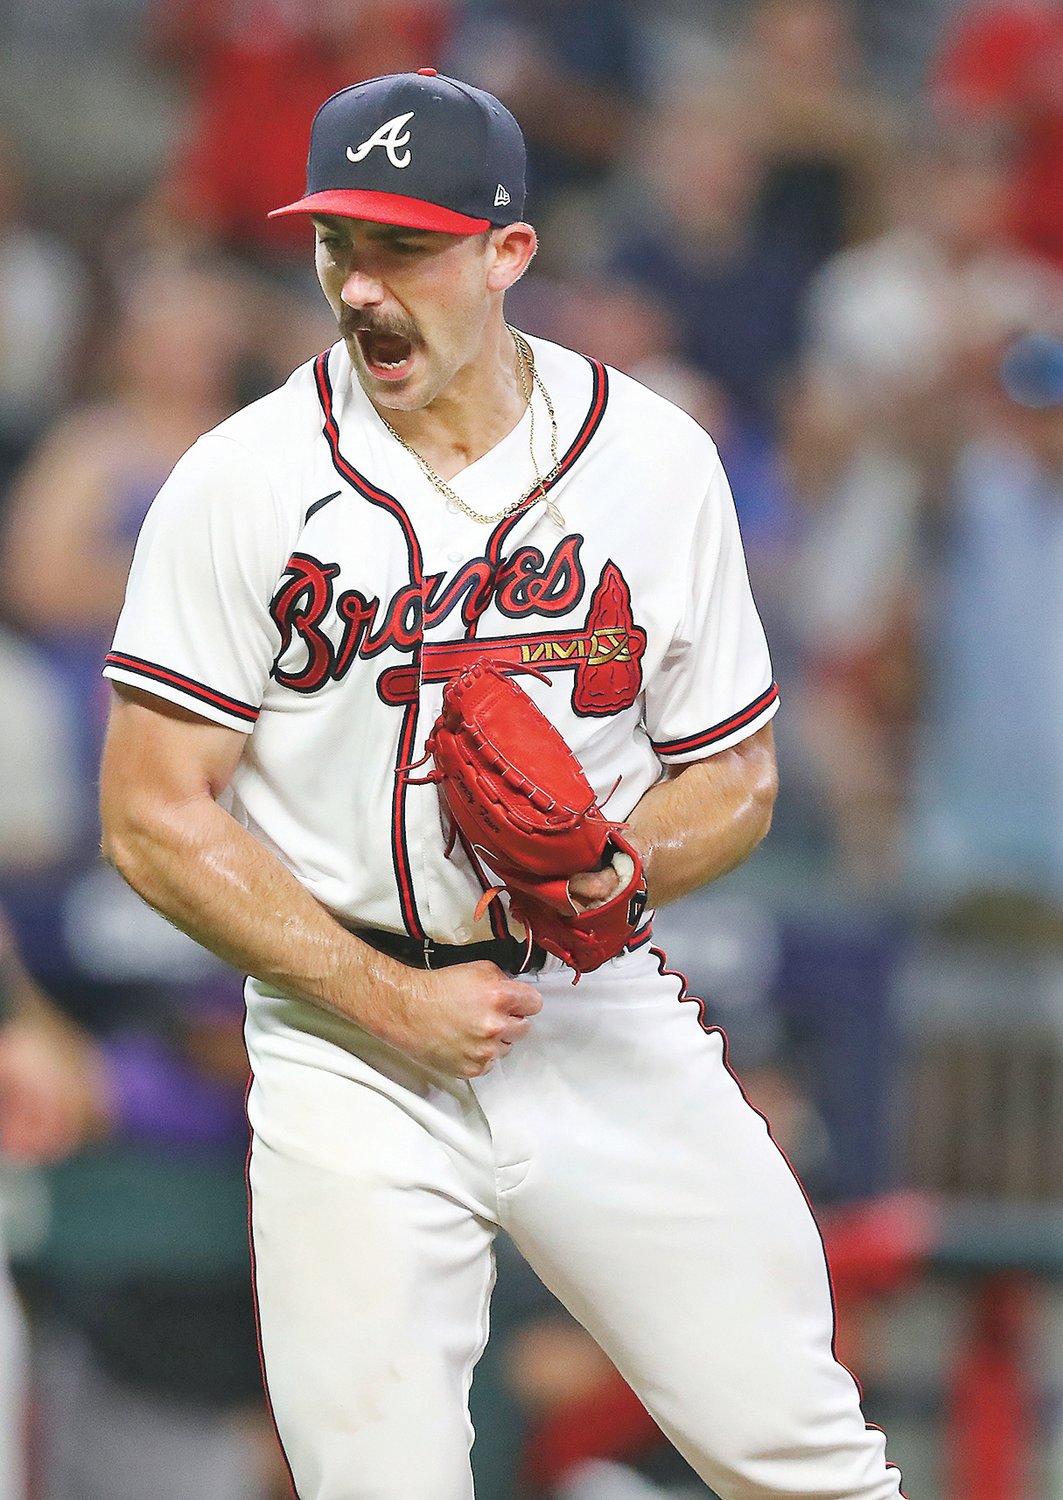 Atlanta Braves pitcher Spencer Strider switches jersey number to